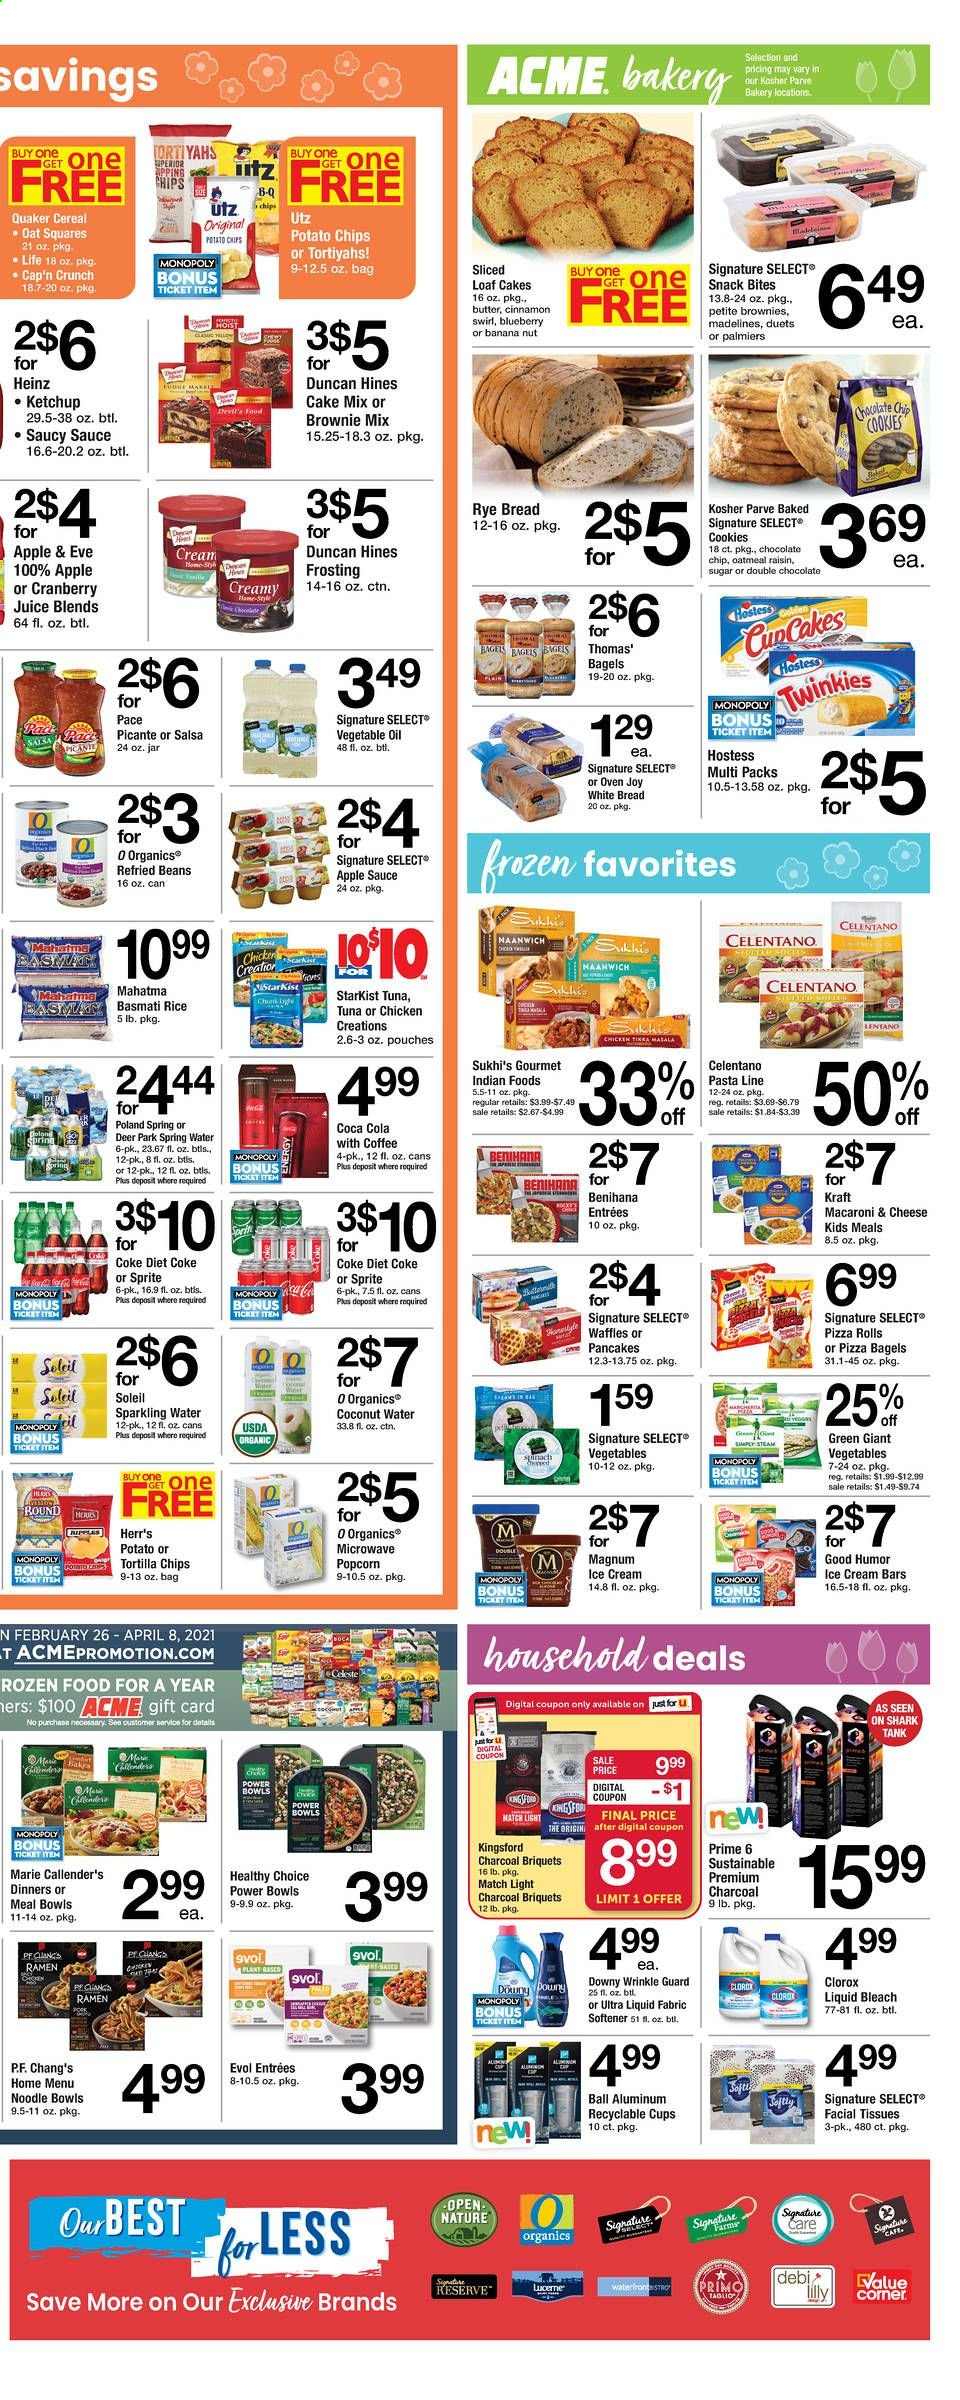 thumbnail - ACME Flyer - 03/05/2021 - 03/11/2021 - Sales products - bread, white bread, pizza rolls, bagels, brownie mix, cake mix, pancakes, waffles, StarKist, macaroni & cheese, ramen, pizza, sauce, Quaker, Healthy Choice, Marie Callender's, Kraft®, butter, salsa, ice cream, ice cream bars, beans, cookies, tortilla chips, potato chips, snack, popcorn, frosting, sugar, oatmeal, oats, refried beans, Heinz, cereals, Cap'n Crunch, basmati rice, rice, pasta, noodles, cinnamon, Tikka Masala, ketchup, vegetable oil, apple sauce, raisins, Coca-Cola, cranberry juice, Sprite, juice, Diet Coke, coconut water, spring water, sparkling water, coffee, tissues, Clorox, fabric softener, bleach, Joy, facial tissues, cup, tank, cap, Monopoly. Page 4.